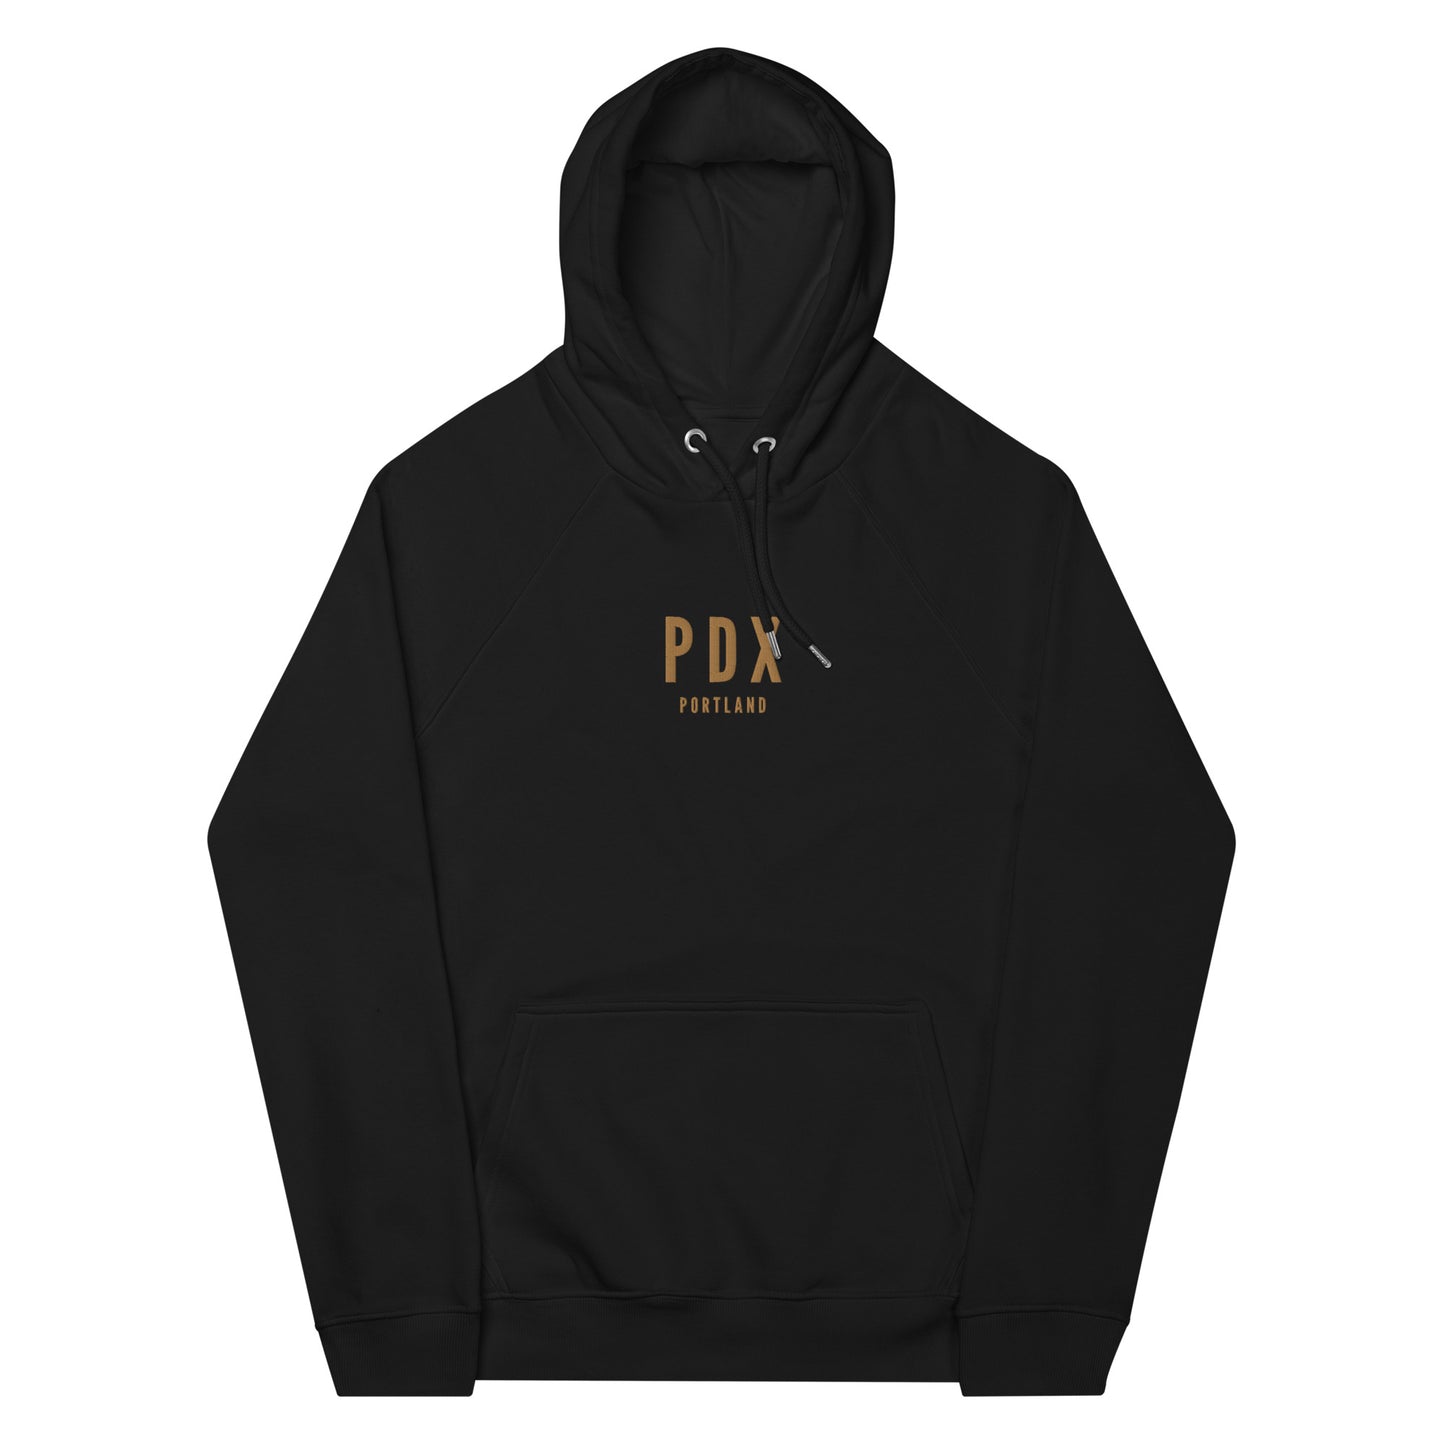 City Organic Hoodie - Old Gold • PDX Portland • YHM Designs - Image 10